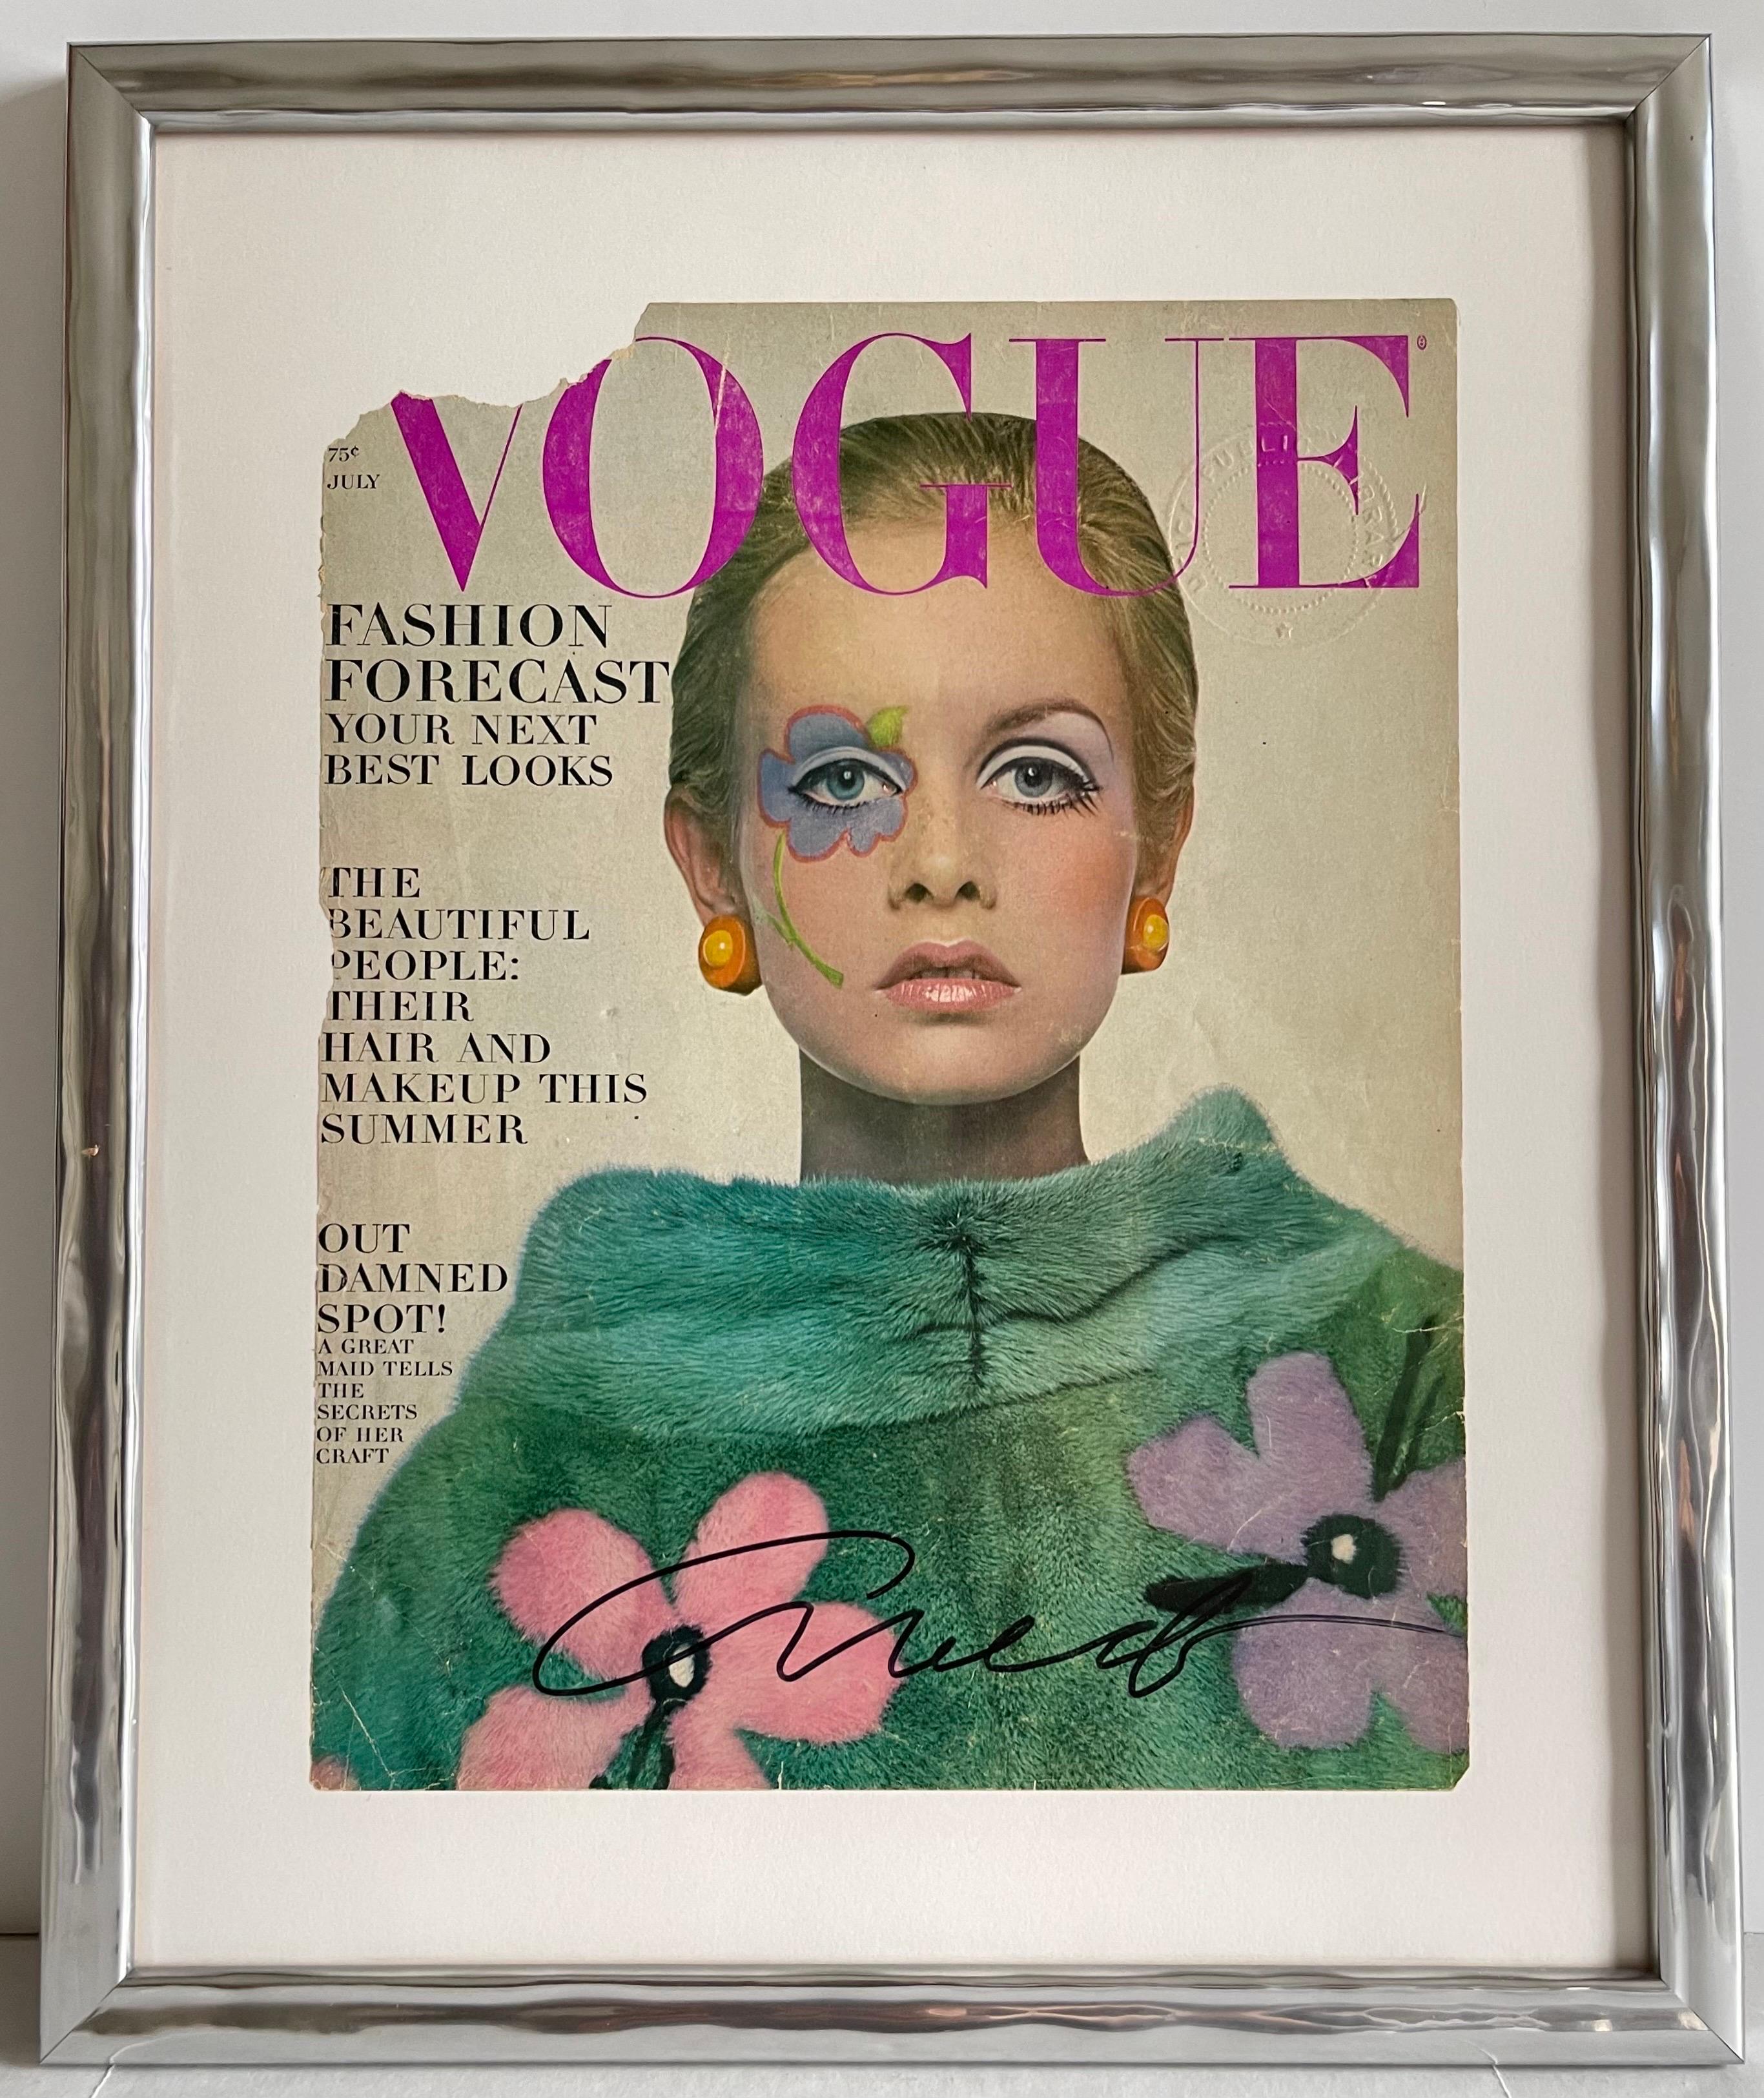 Glass Vogue July 1967 Twiggy Cover Signed by Richard Avedon